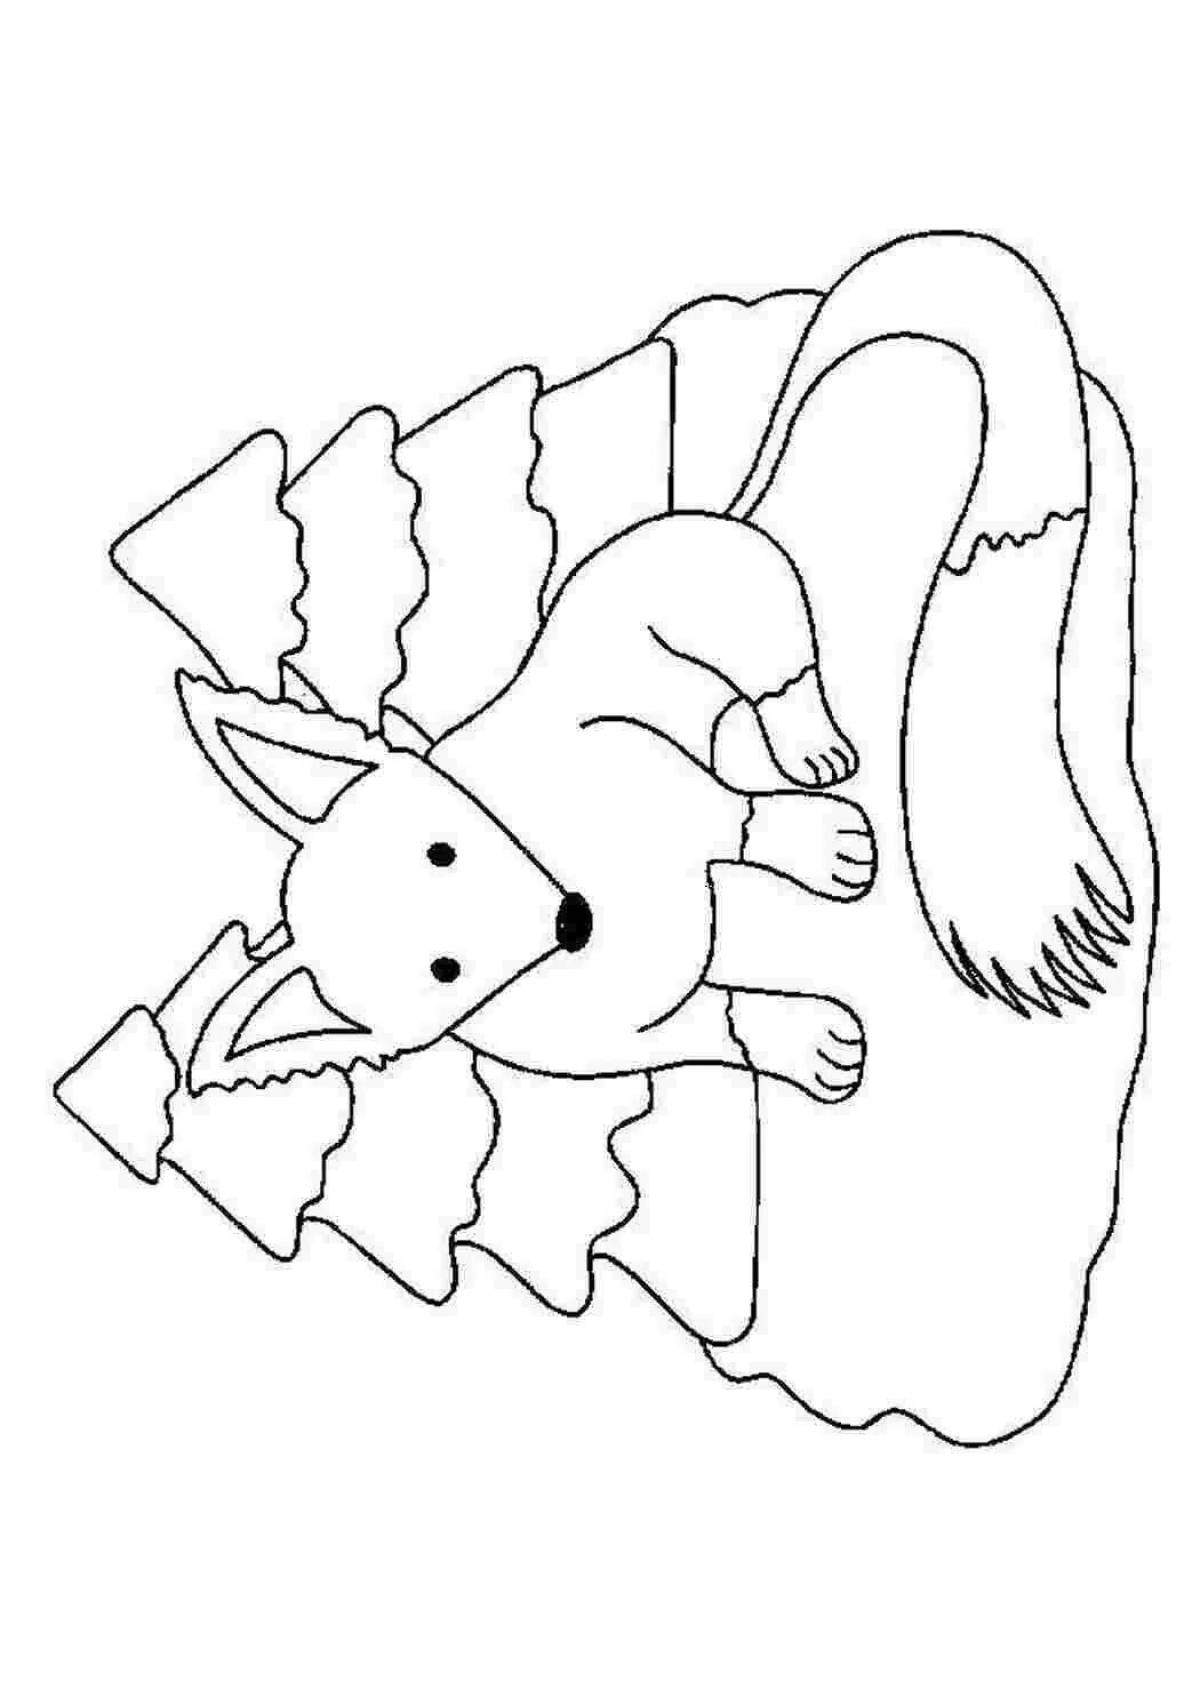 Coloring page fluttering fox in the forest